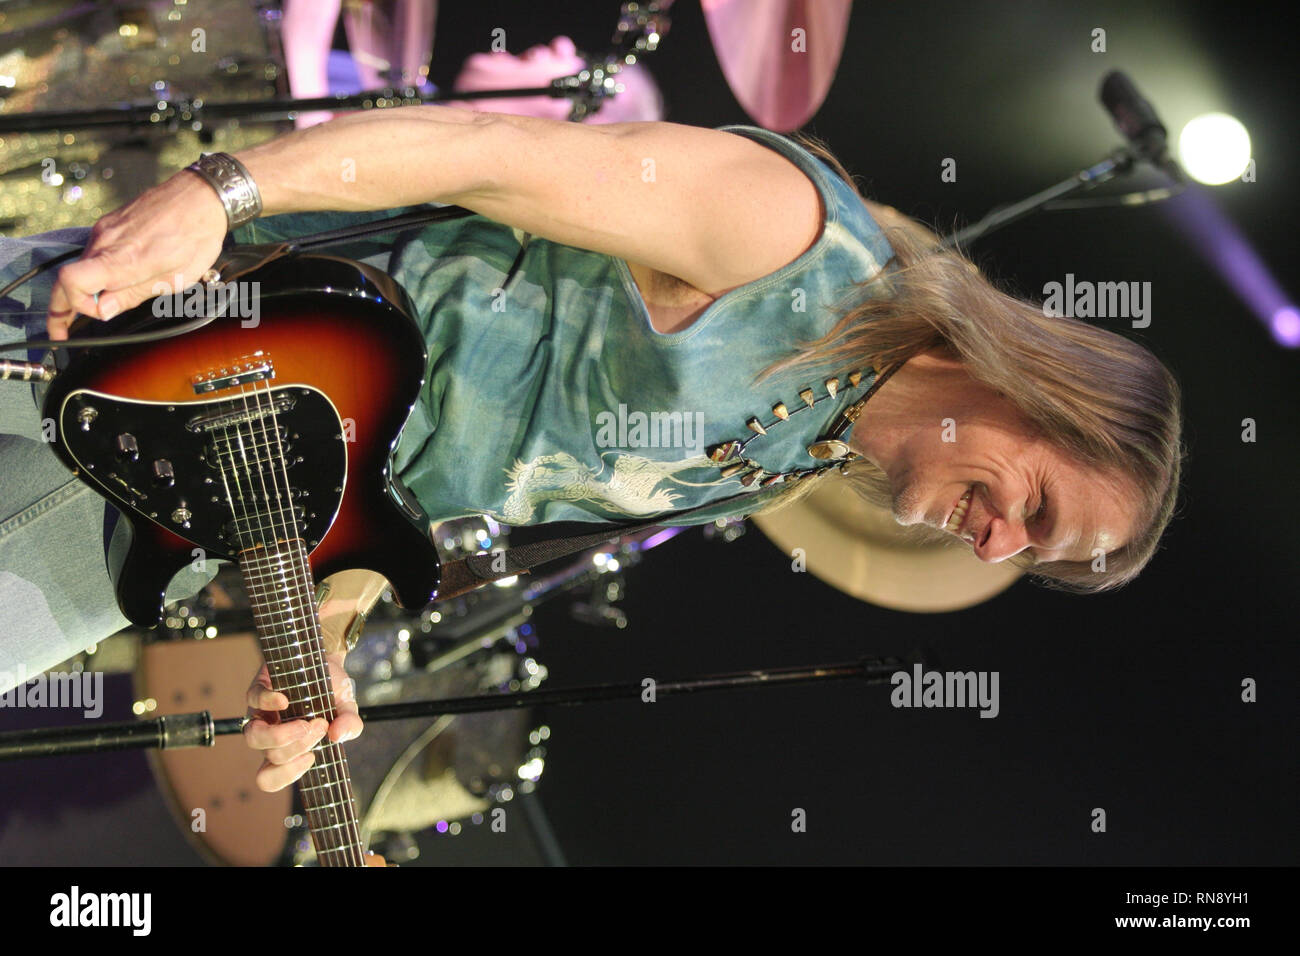 Deep Purple guitarist Steve Morse is shown performing on stage during a 'live' concert appearance. Stock Photo